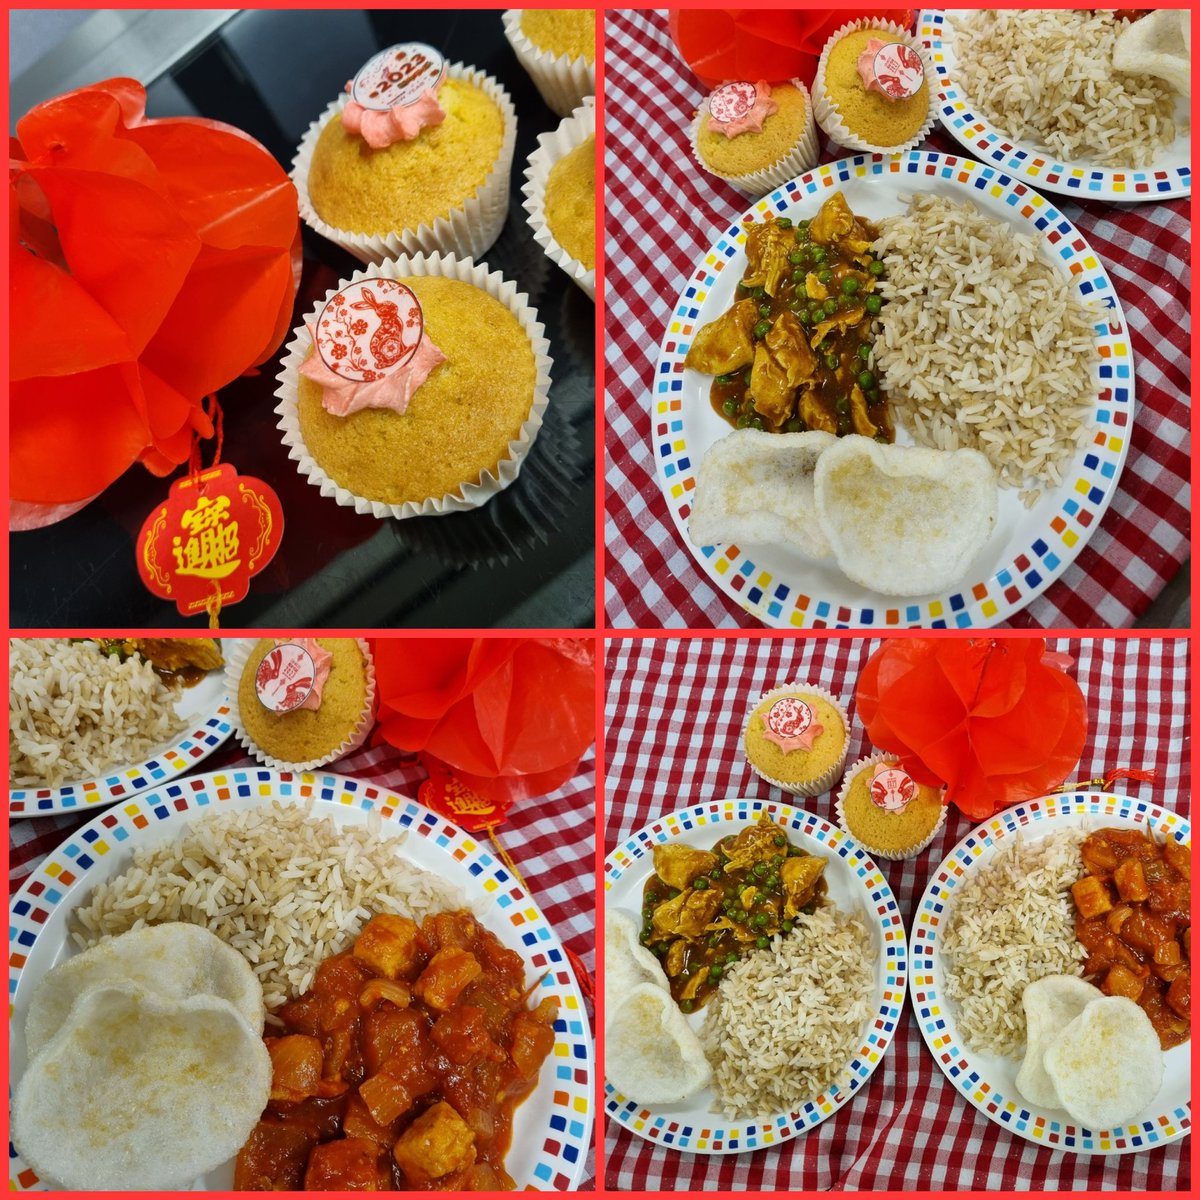 Happy Chinese New Year from @chaddesden_park @LEARNERsTrust #YearOfTheRabbit Chinese style chicken curry and sweet & sour ... wouldn't be a Chinese with crunchy prawn crackers 😋 🐰 @mellorscatering @NeilEastwood11 @AnneKav1968 @DBNutrition_ @devchefmickey